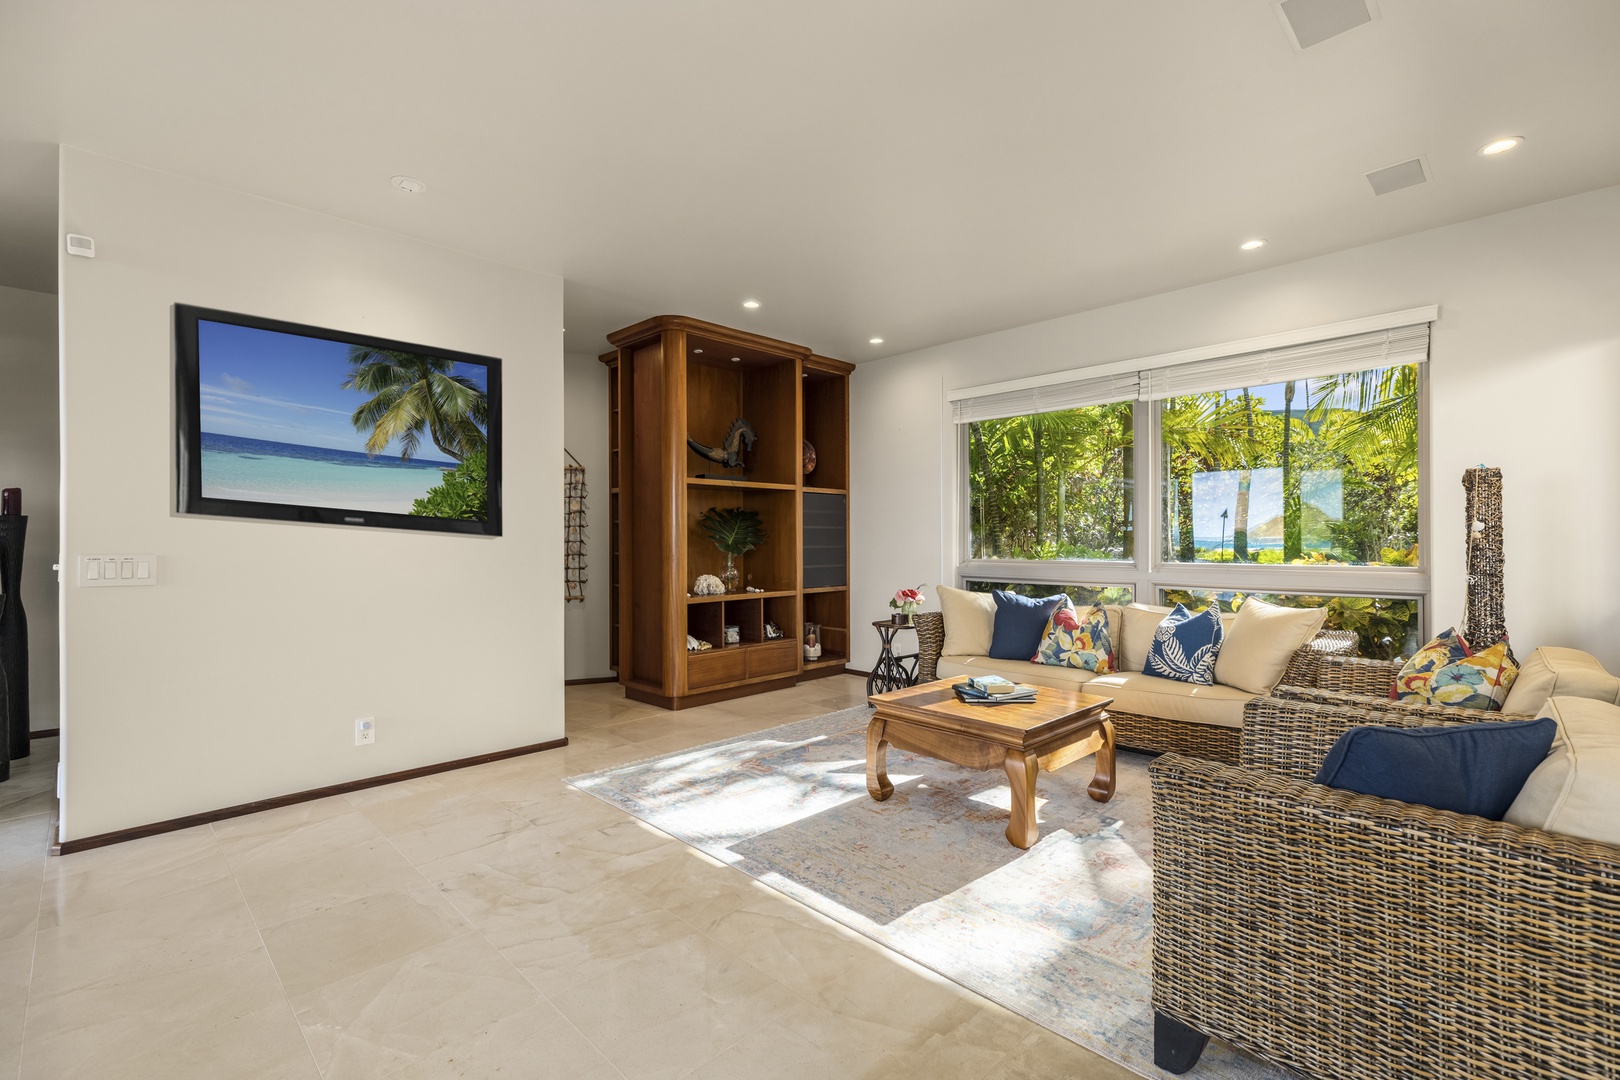 Kailua Vacation Rentals, Mokulua Sunrise - Gather in the TV room with family and friends for a movie night